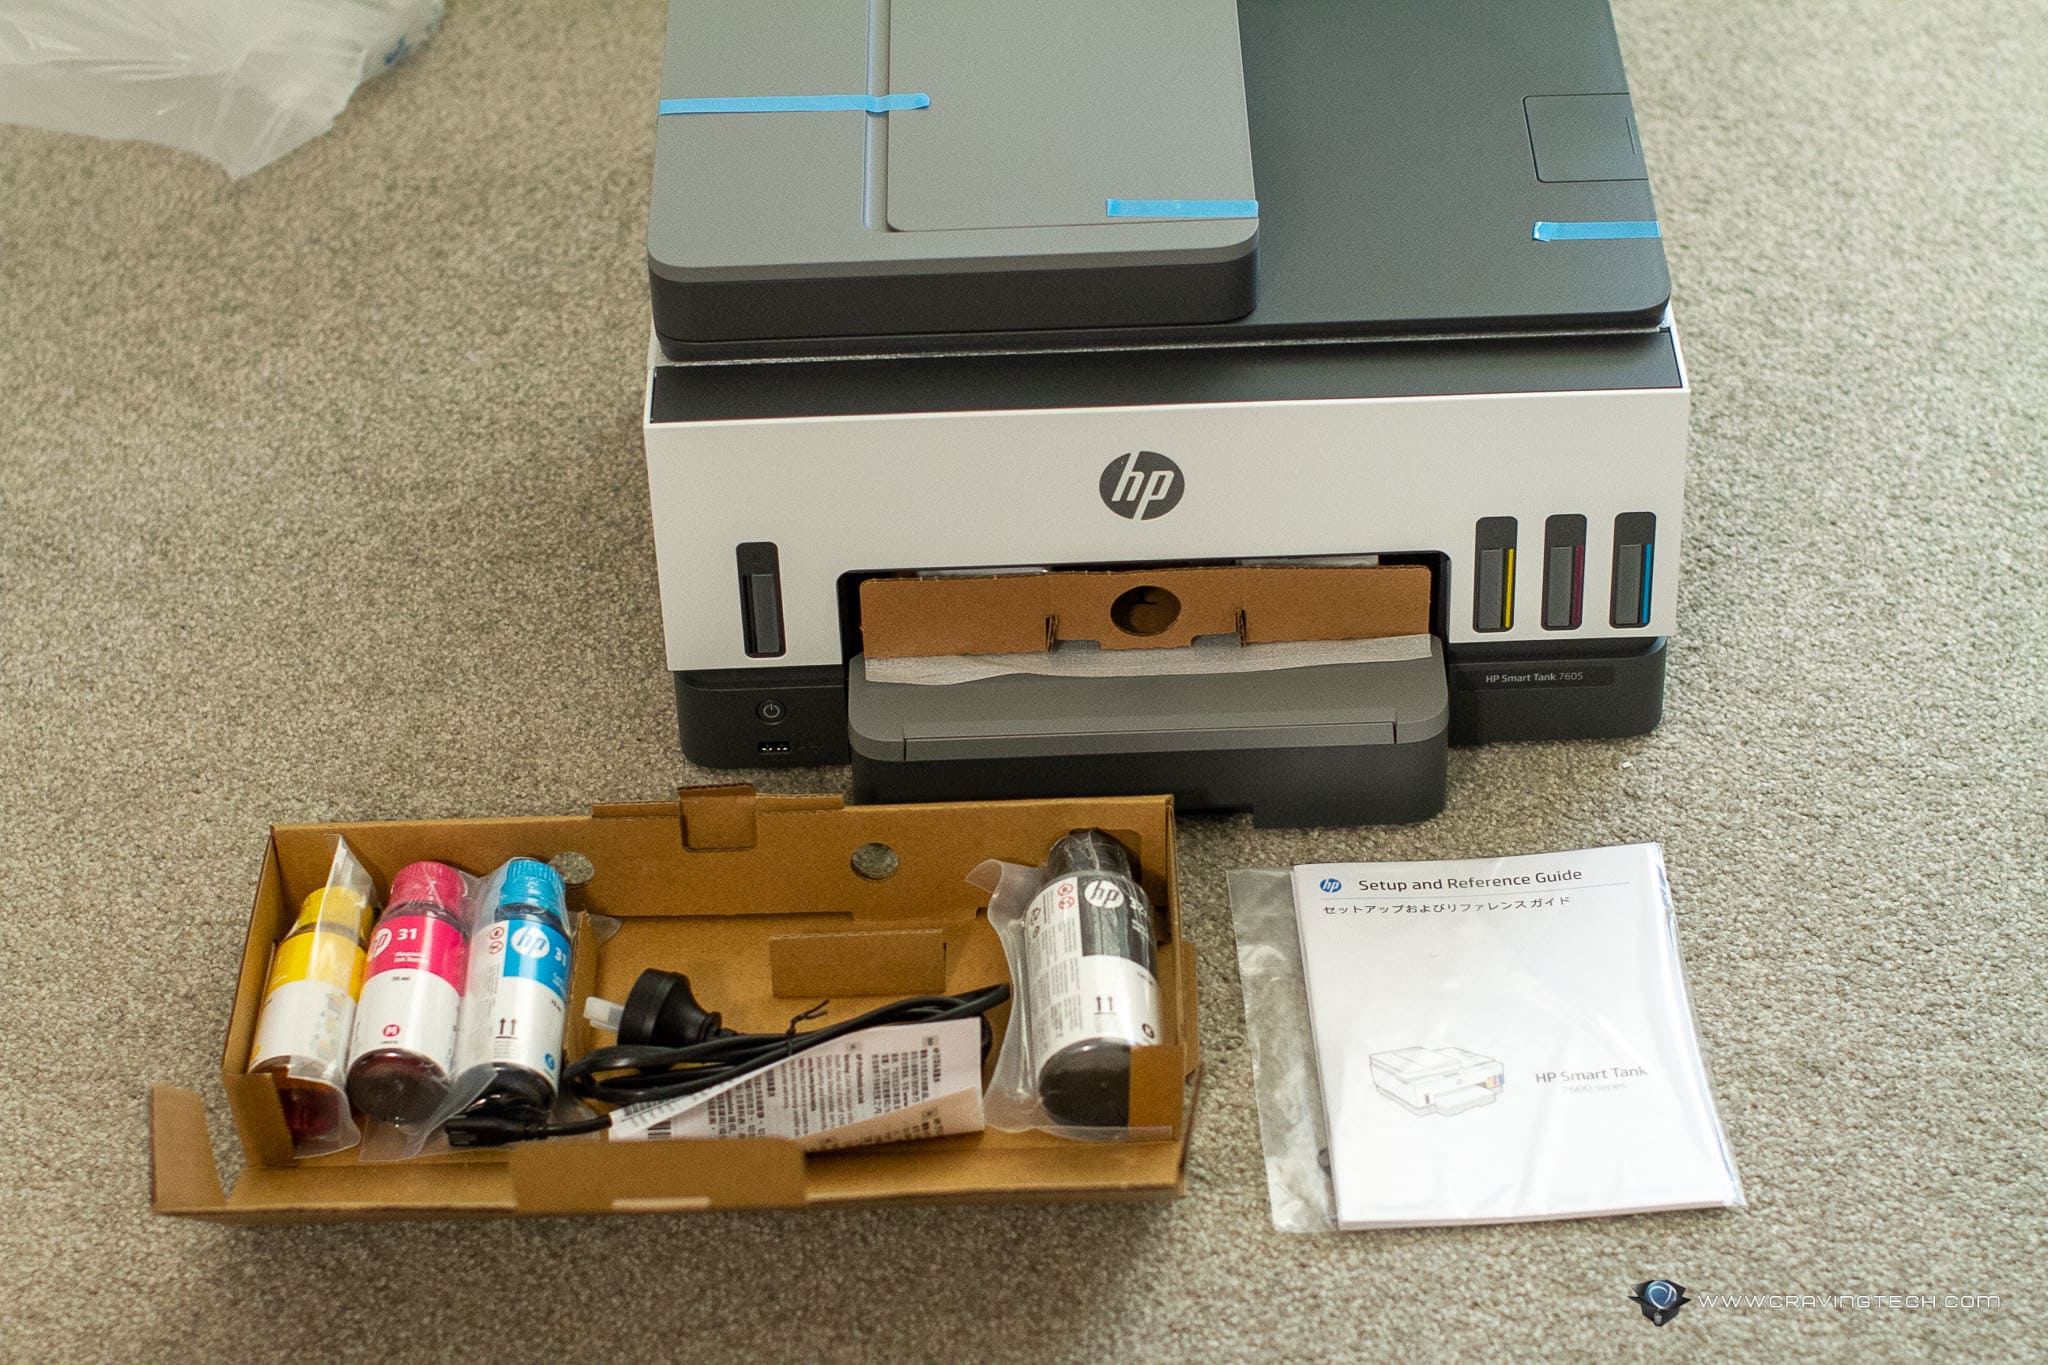 HP Smart Tank 7605 A4 All-in-One Ink Tank Printer